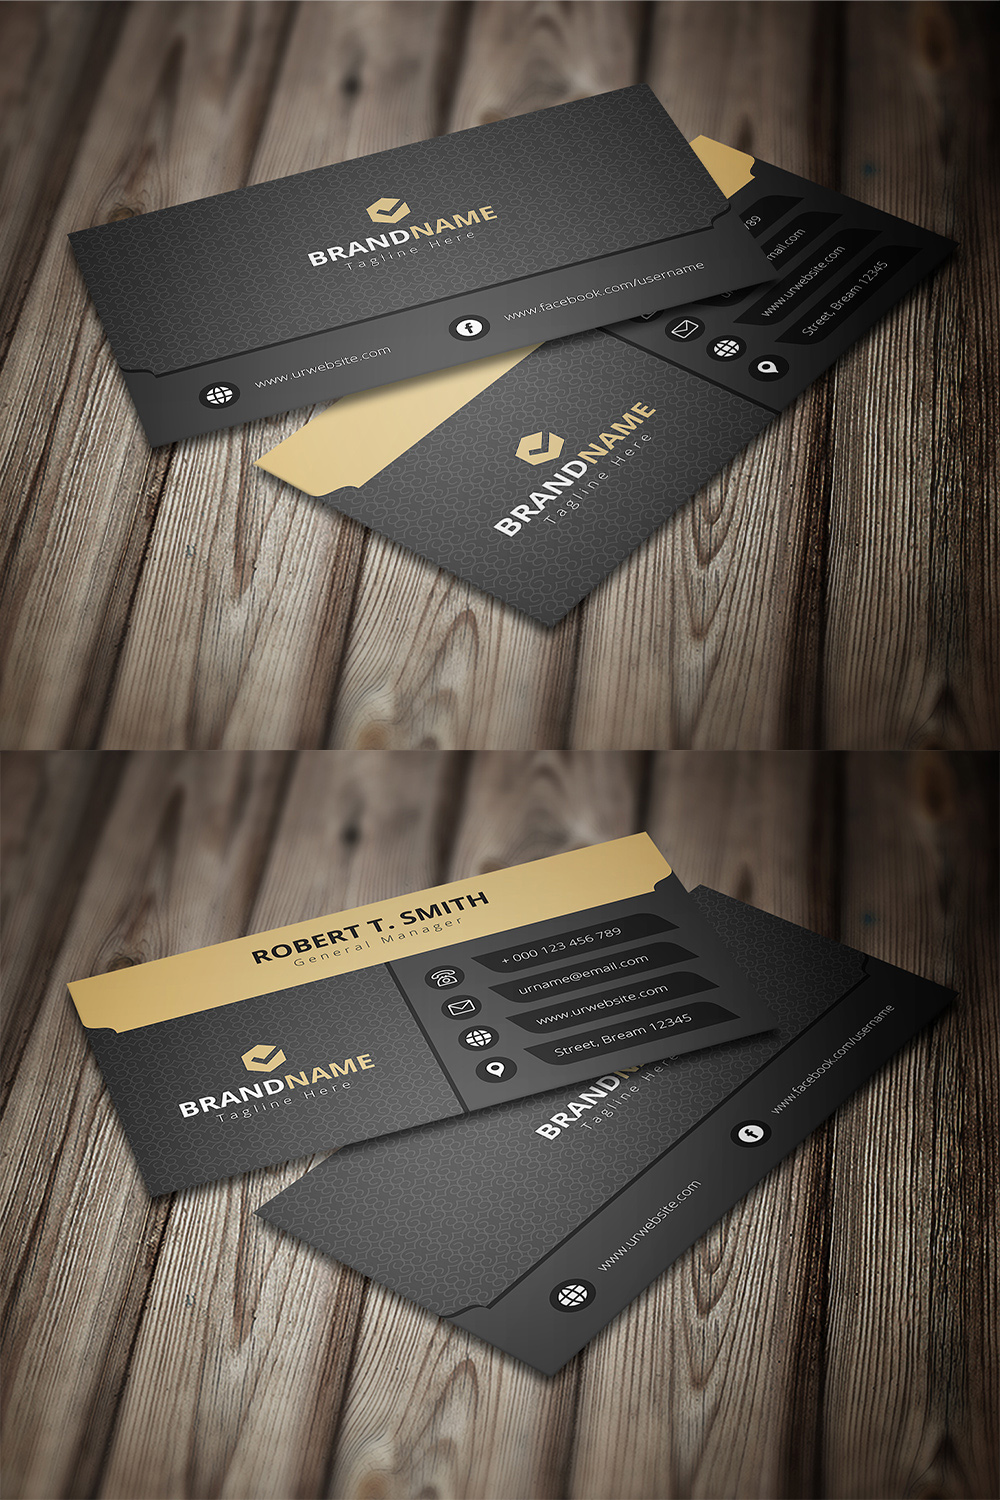 Black and gold business cards.